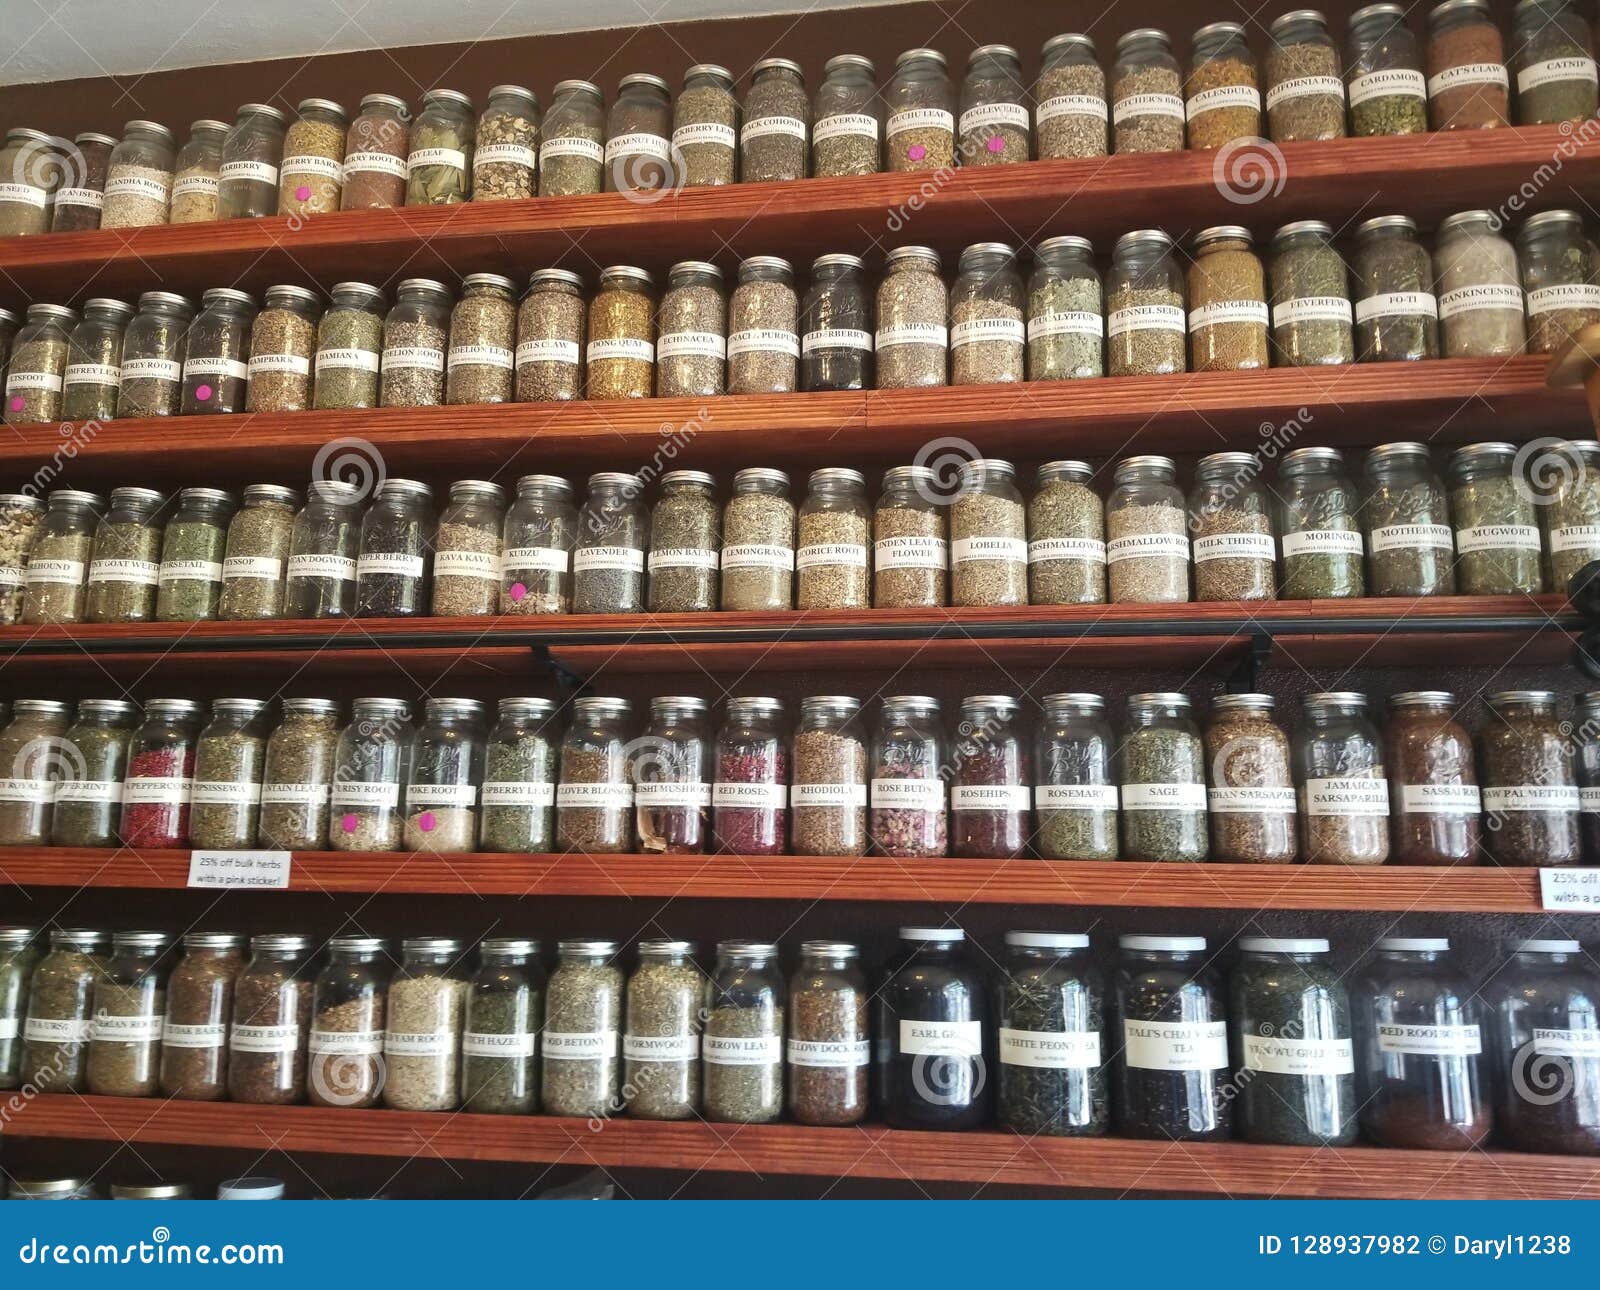 spice rack full of spices